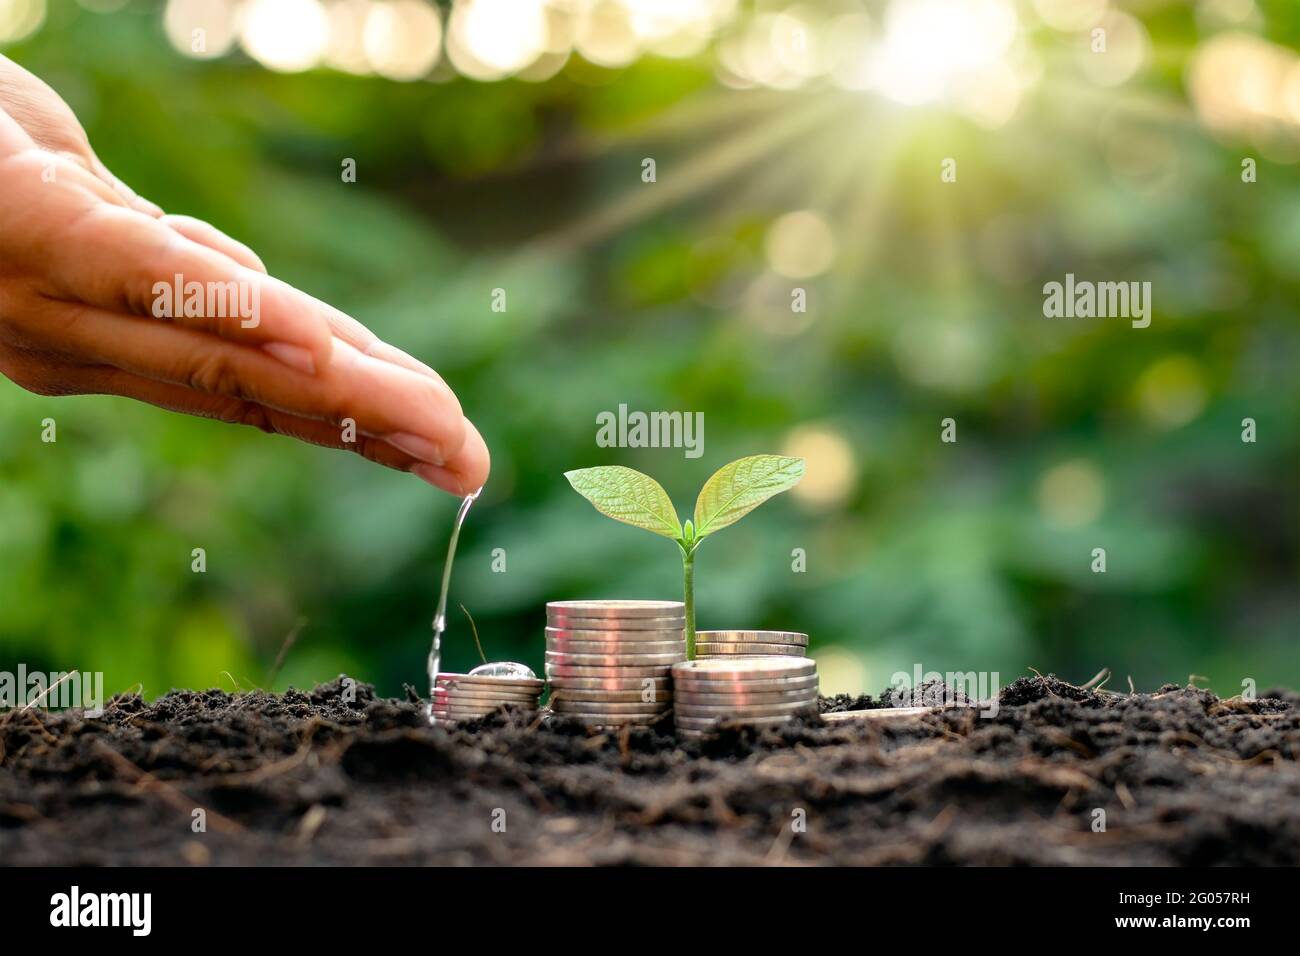 Cropping on the Pile for Business, Savings and Economic Growth. Stock Photo